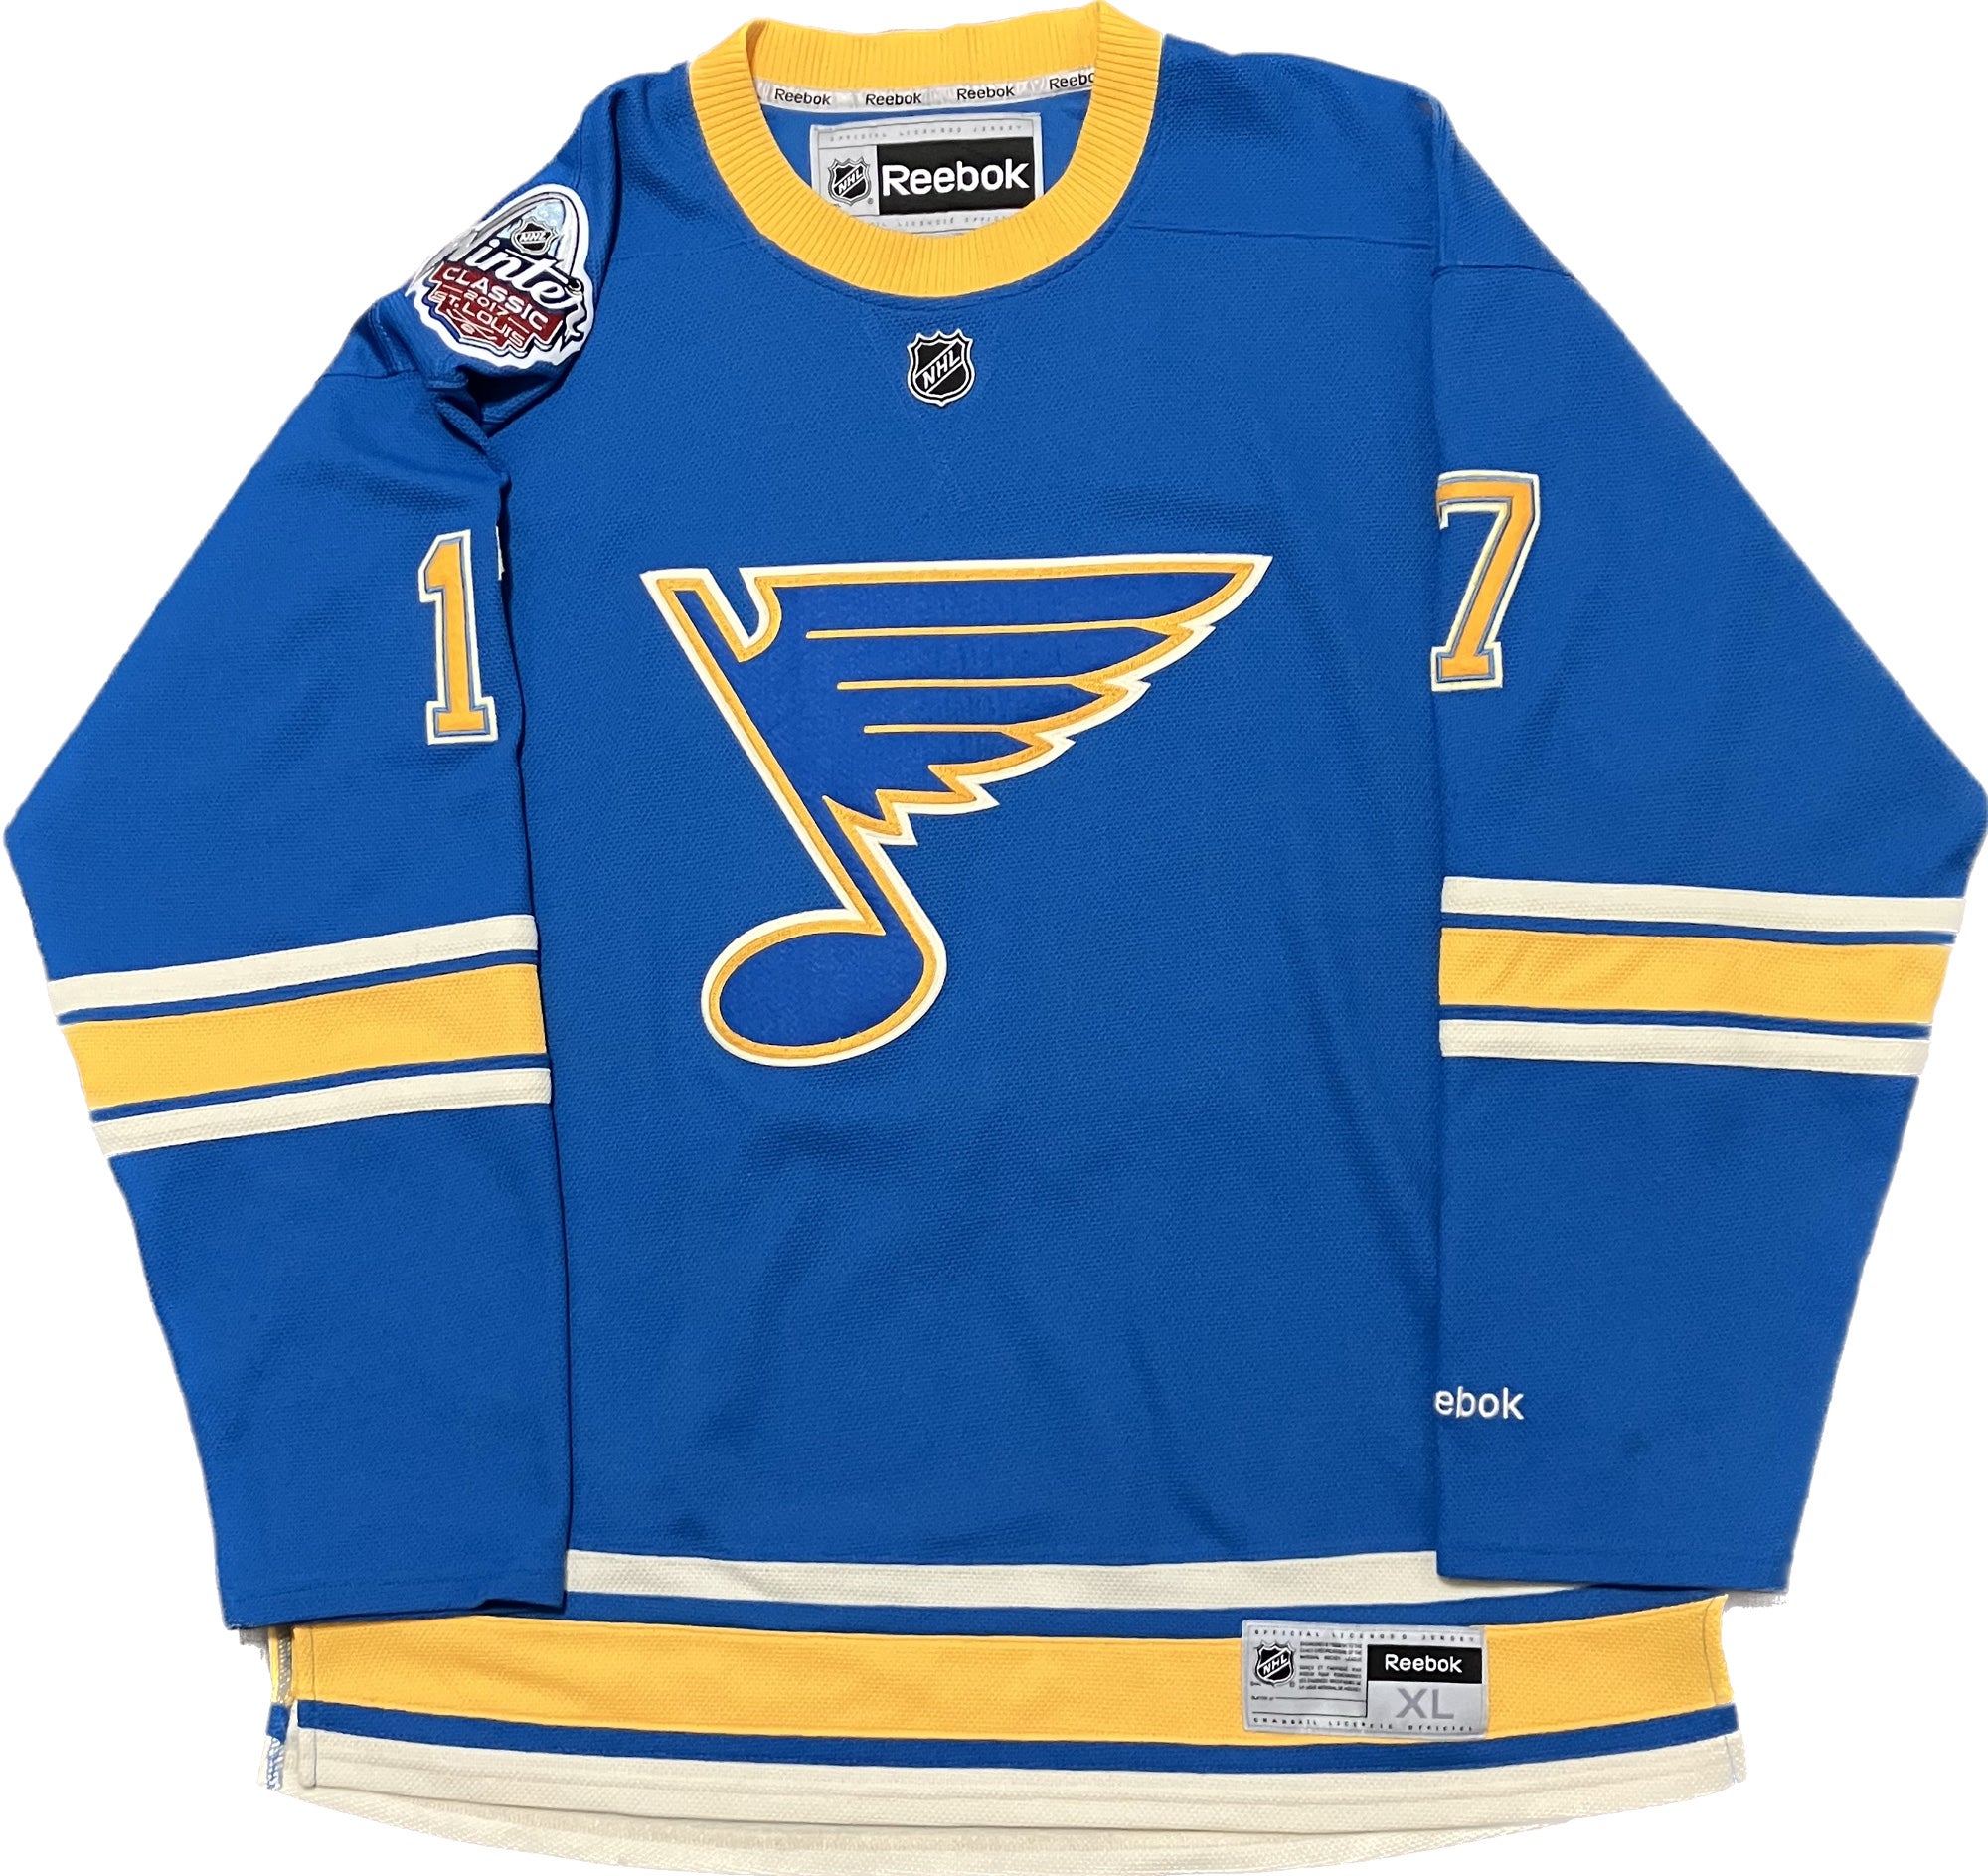 Player Issued - Navy Blue St. Louis Blues 1/2 Zip Long Sleeve